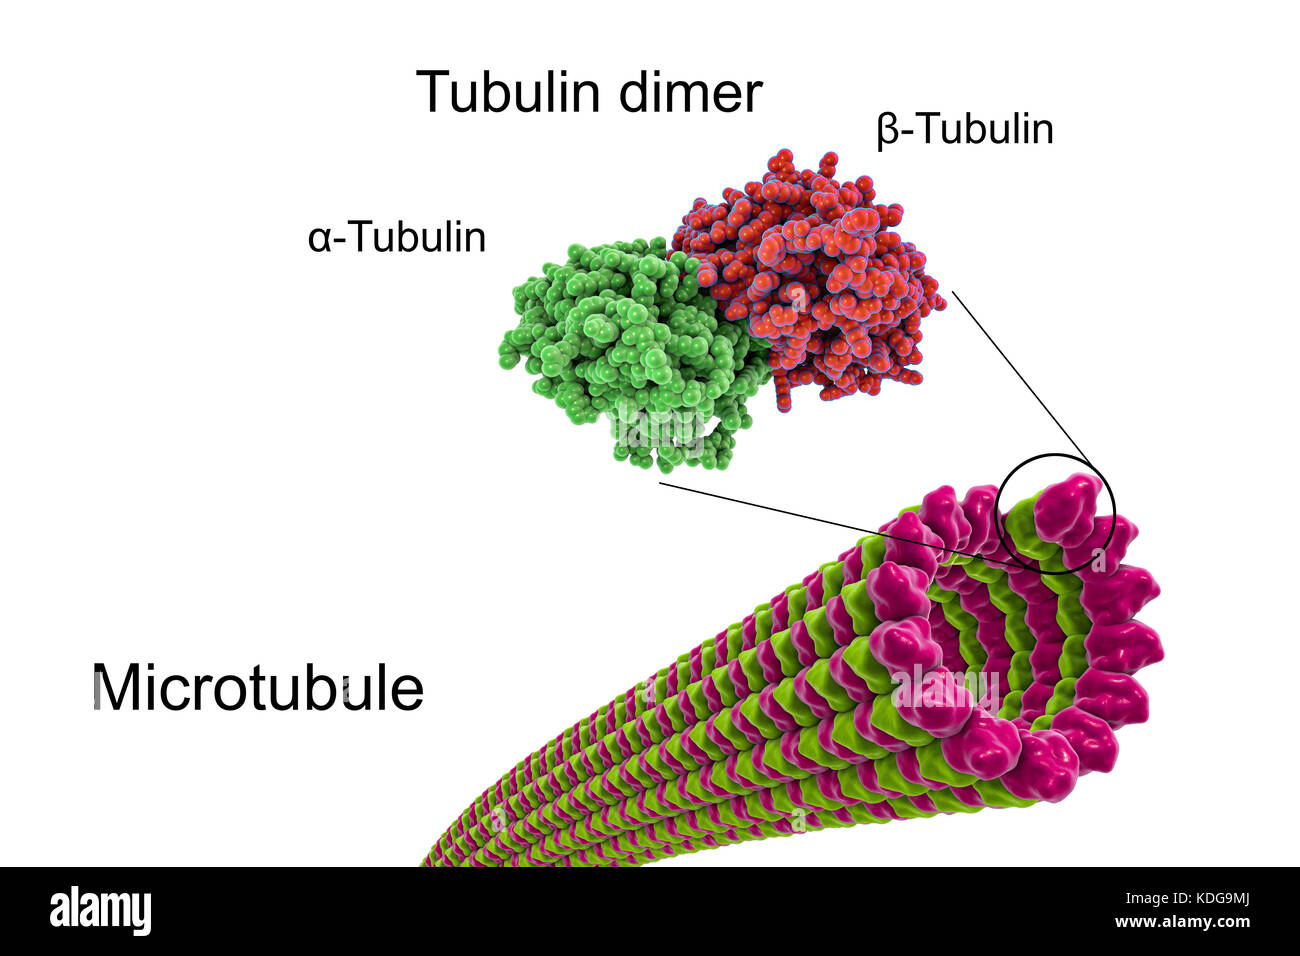 Structure of a microtubule, 3D computer illustration. Microtubules are polymers of the protein tubulin which is composed of two subunits, alpha- and beta-tubulin. They are a component of the cytoskeleton, which maintains a cell's shape, allows some cellular mobility and is involved in intracellular transport. The tubular polymers of tubulin can grow as long 50 micrometres and are highly dynamic. In Alzheimer's disease, the transport of tau-protein (belonging to the MAP proteins) stabilizing the microtubules is disturbed and allows phosphate-groups to attach to the tau-protein, destabilizing Stock Photo